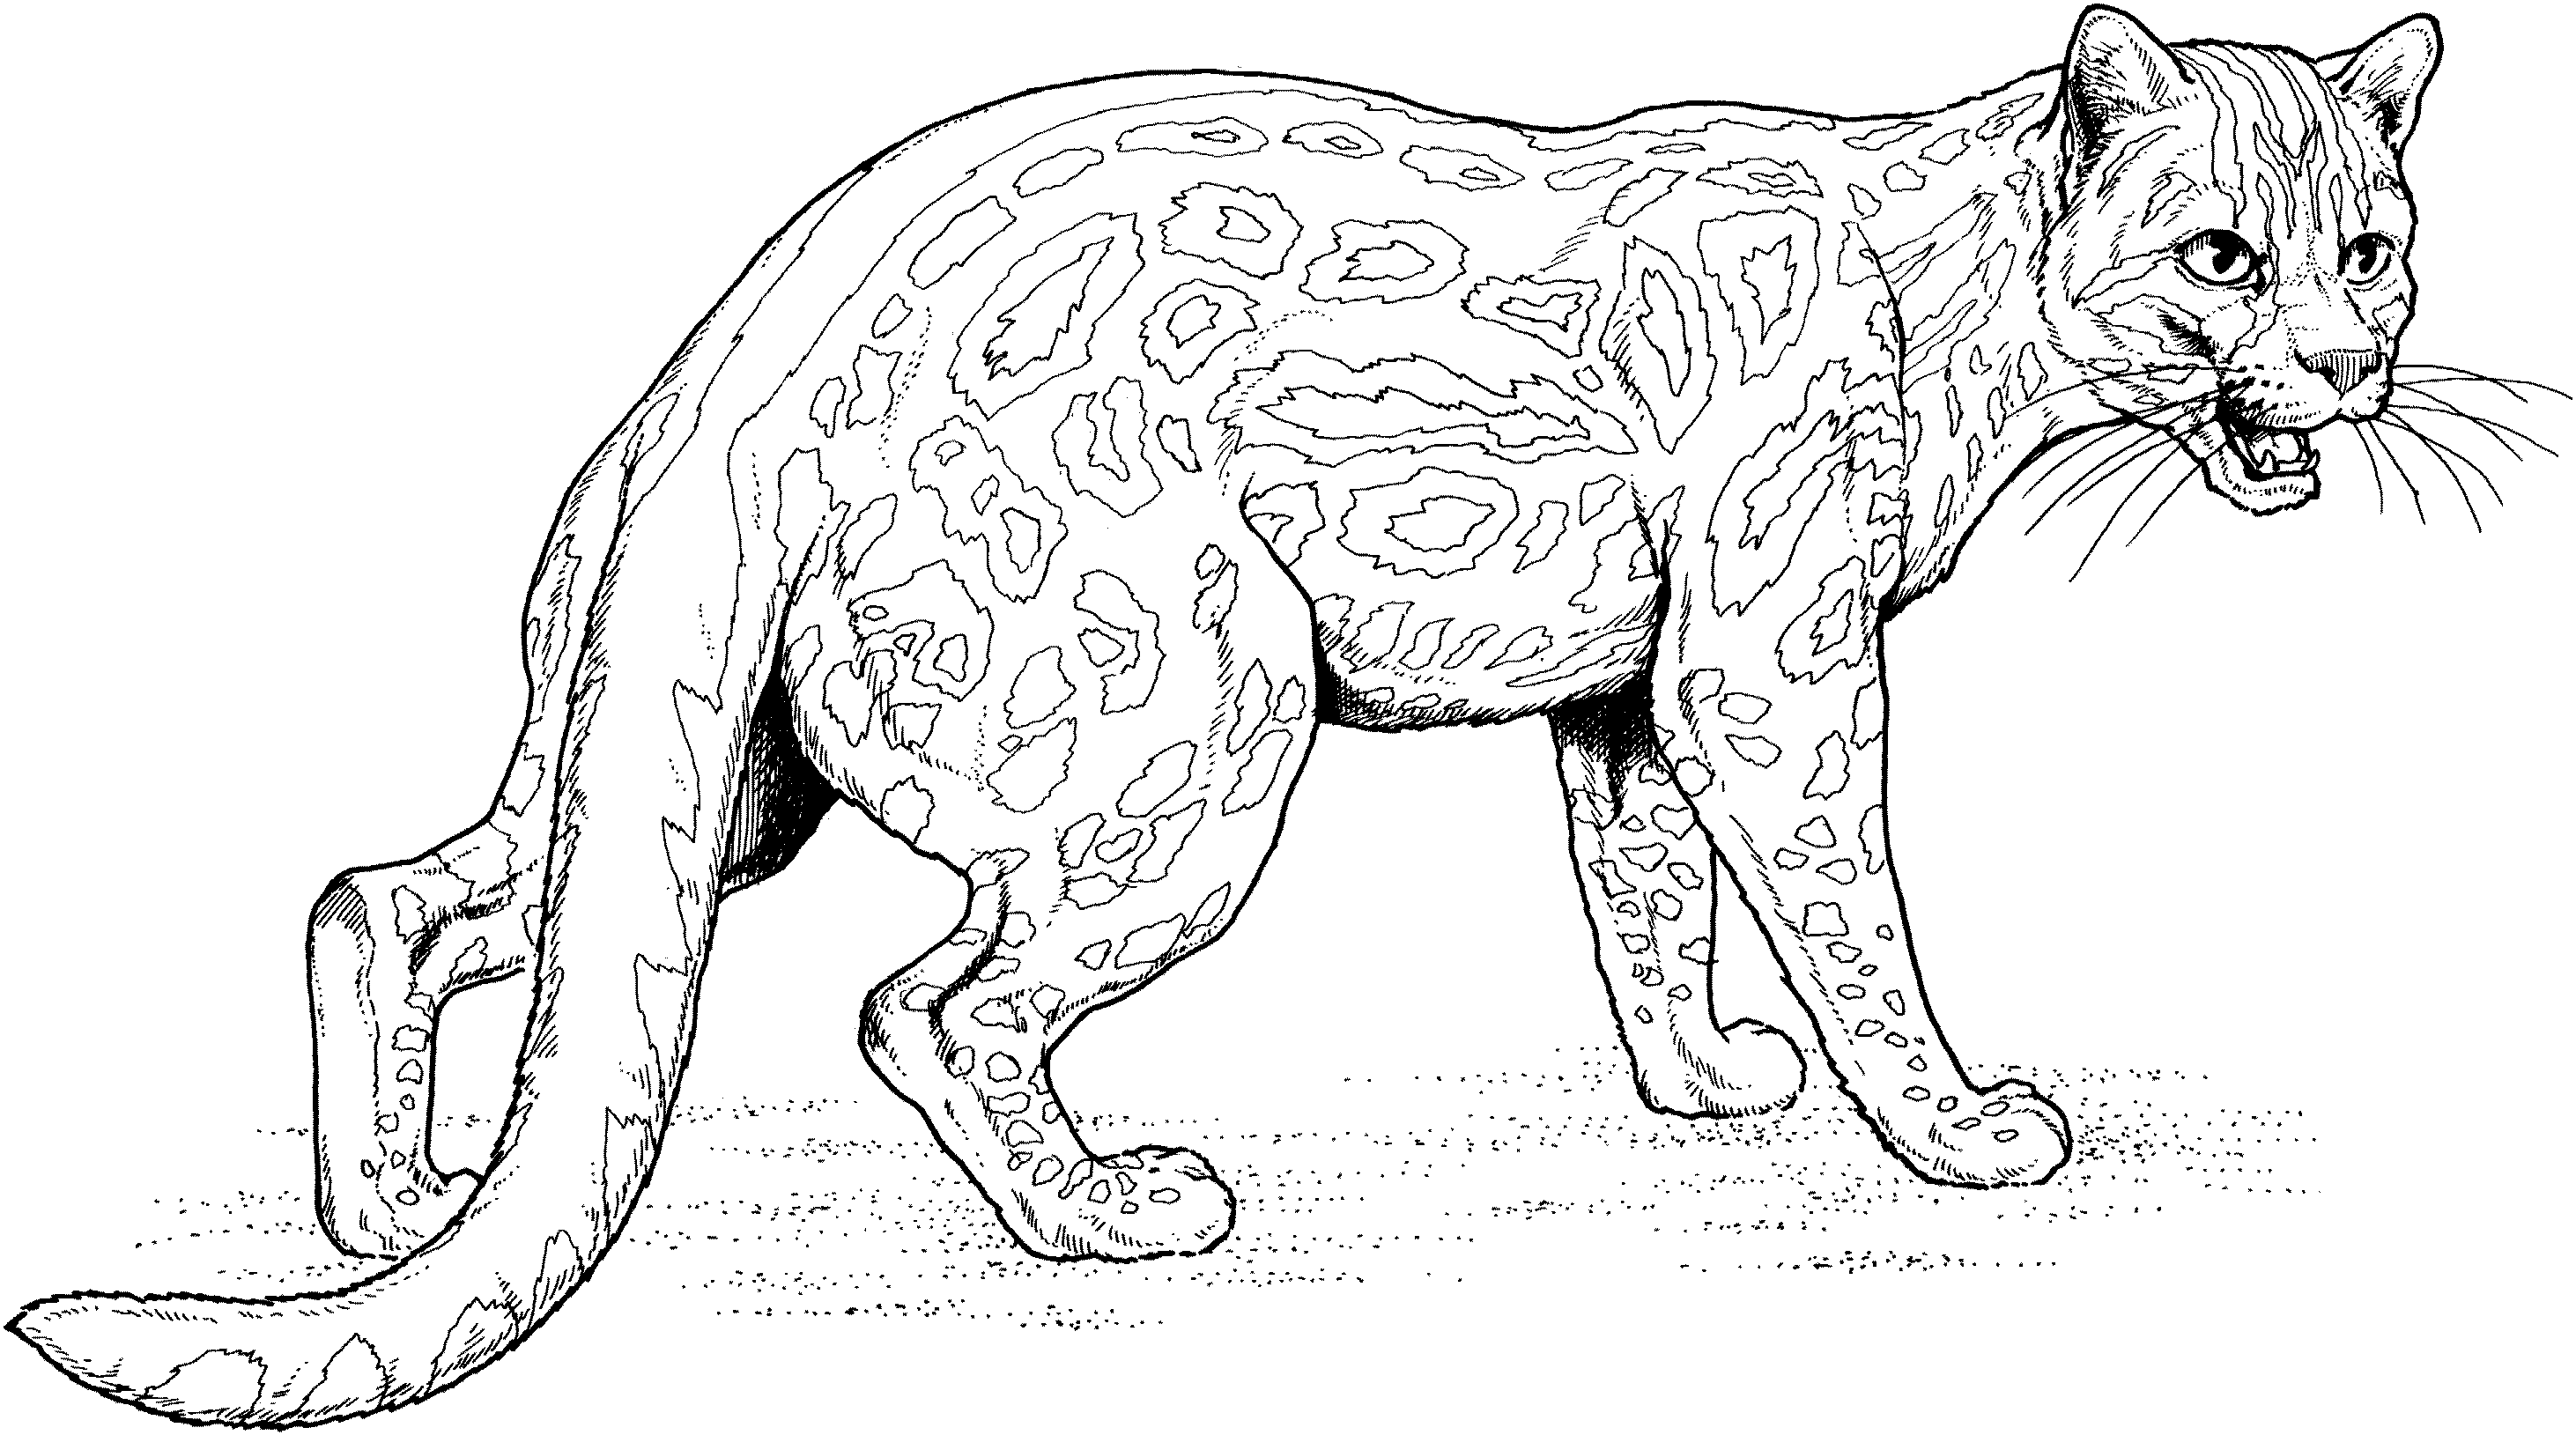 coloring pages of baby cats